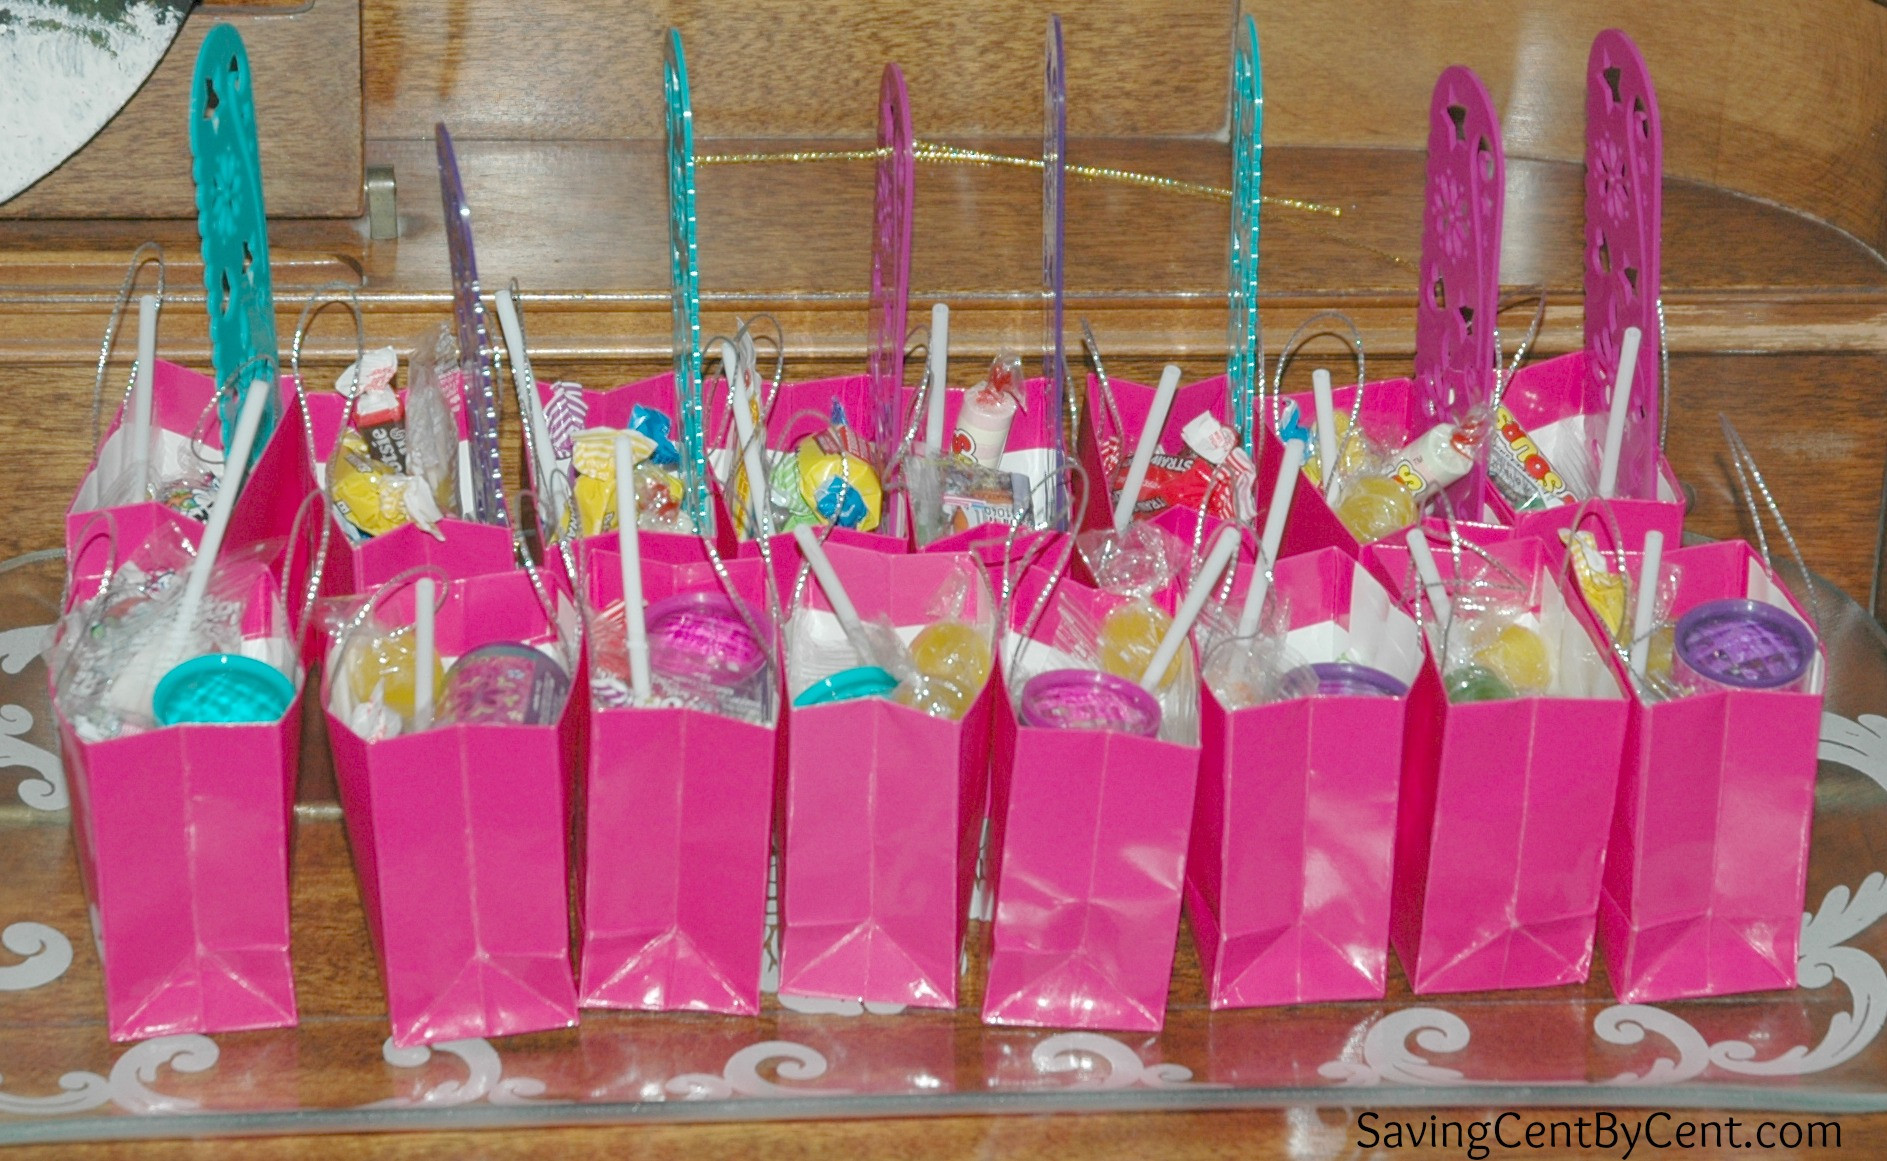 Frozen Birthday Gifts
 Simple Frozen Birthday Party Ideas Saving Cent by Cent